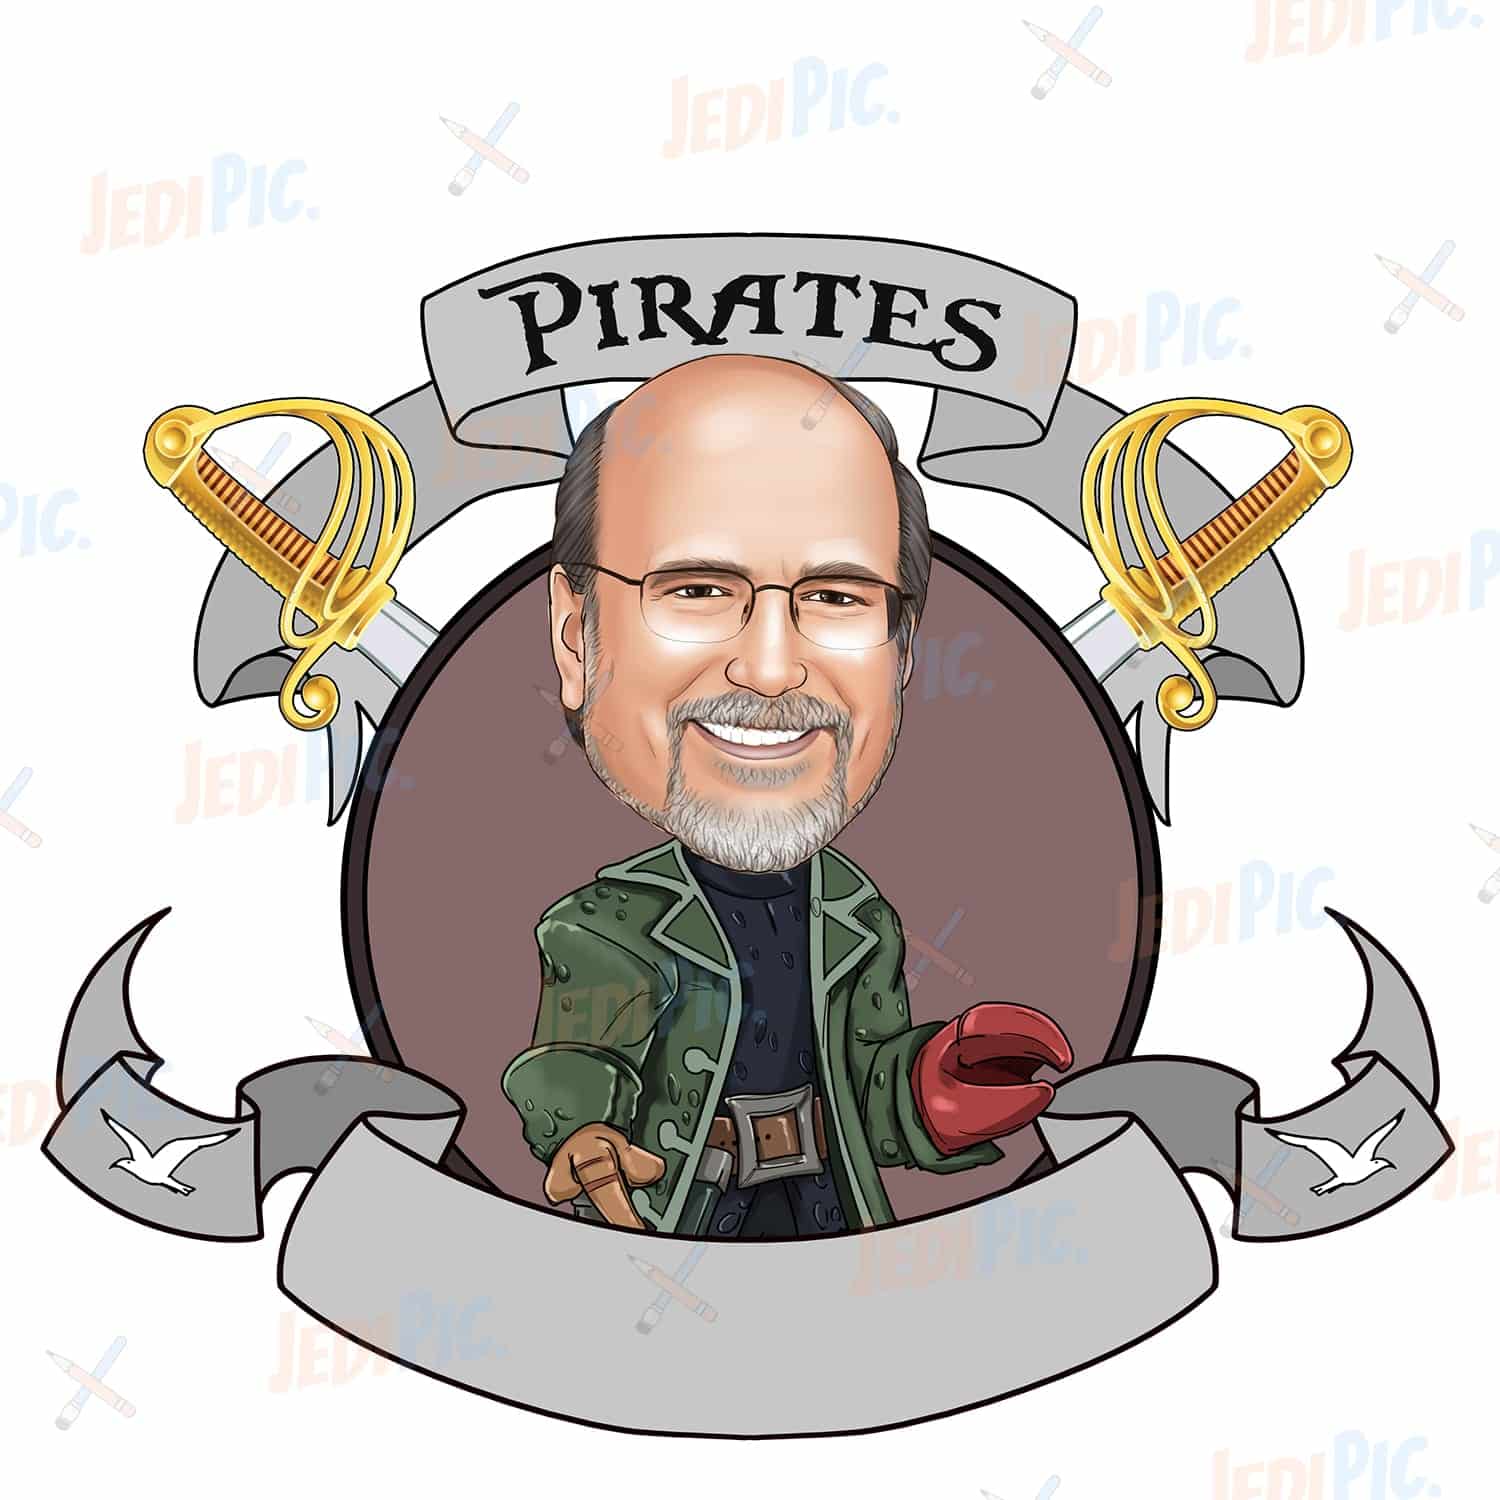 Pirate Caricature Drawing from Photos